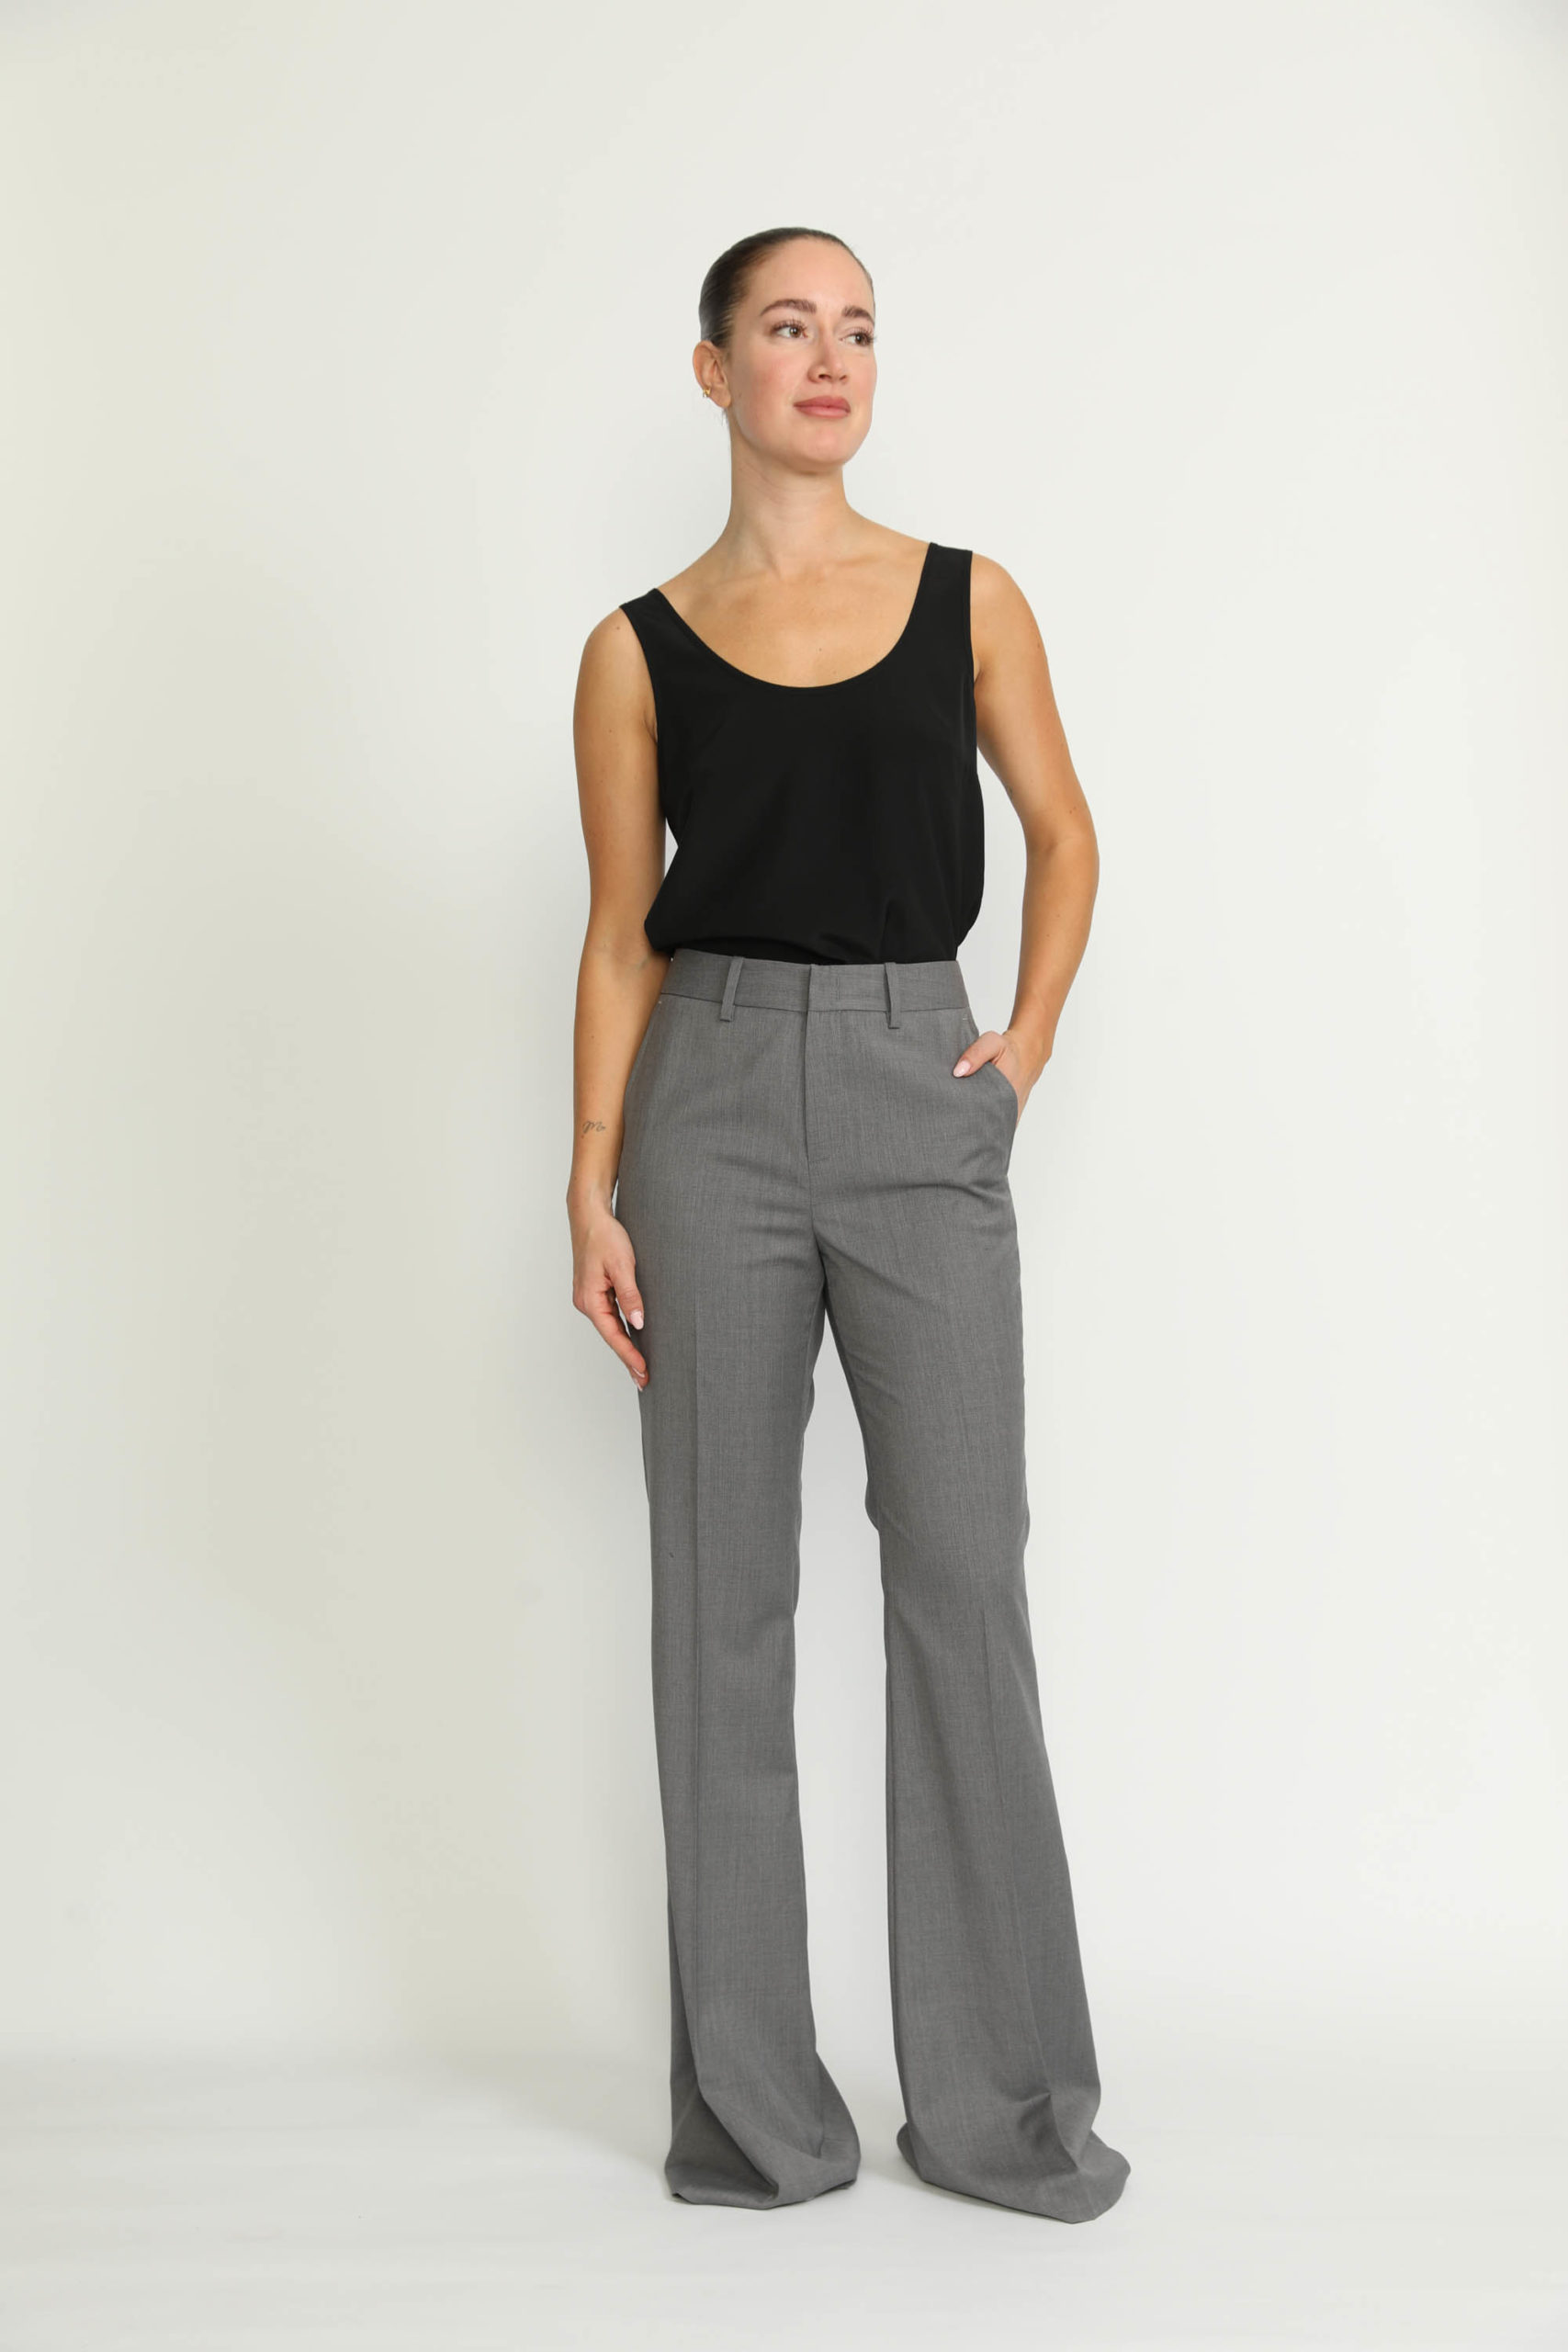 Sursee Trousers – Sursee Bell Bottom Flared Grey Trousers0